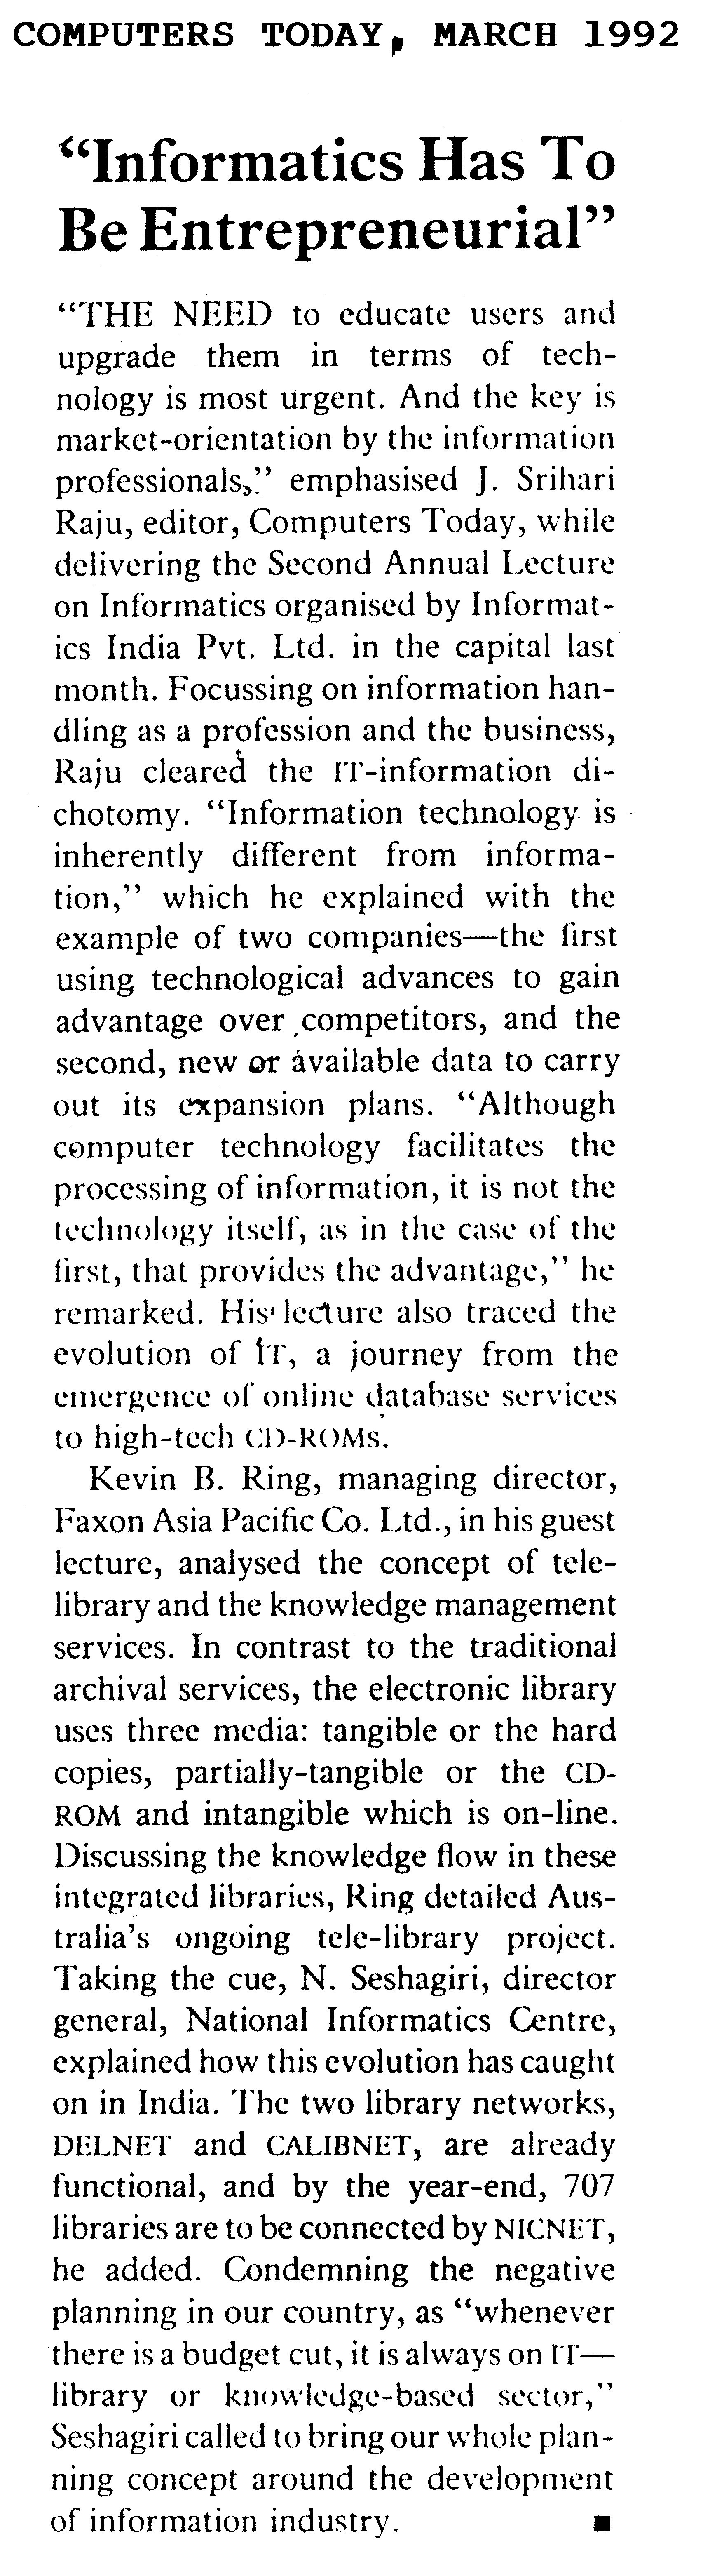 Informatics Has To Be Entrepreneurial (Computers Today, March 1992)